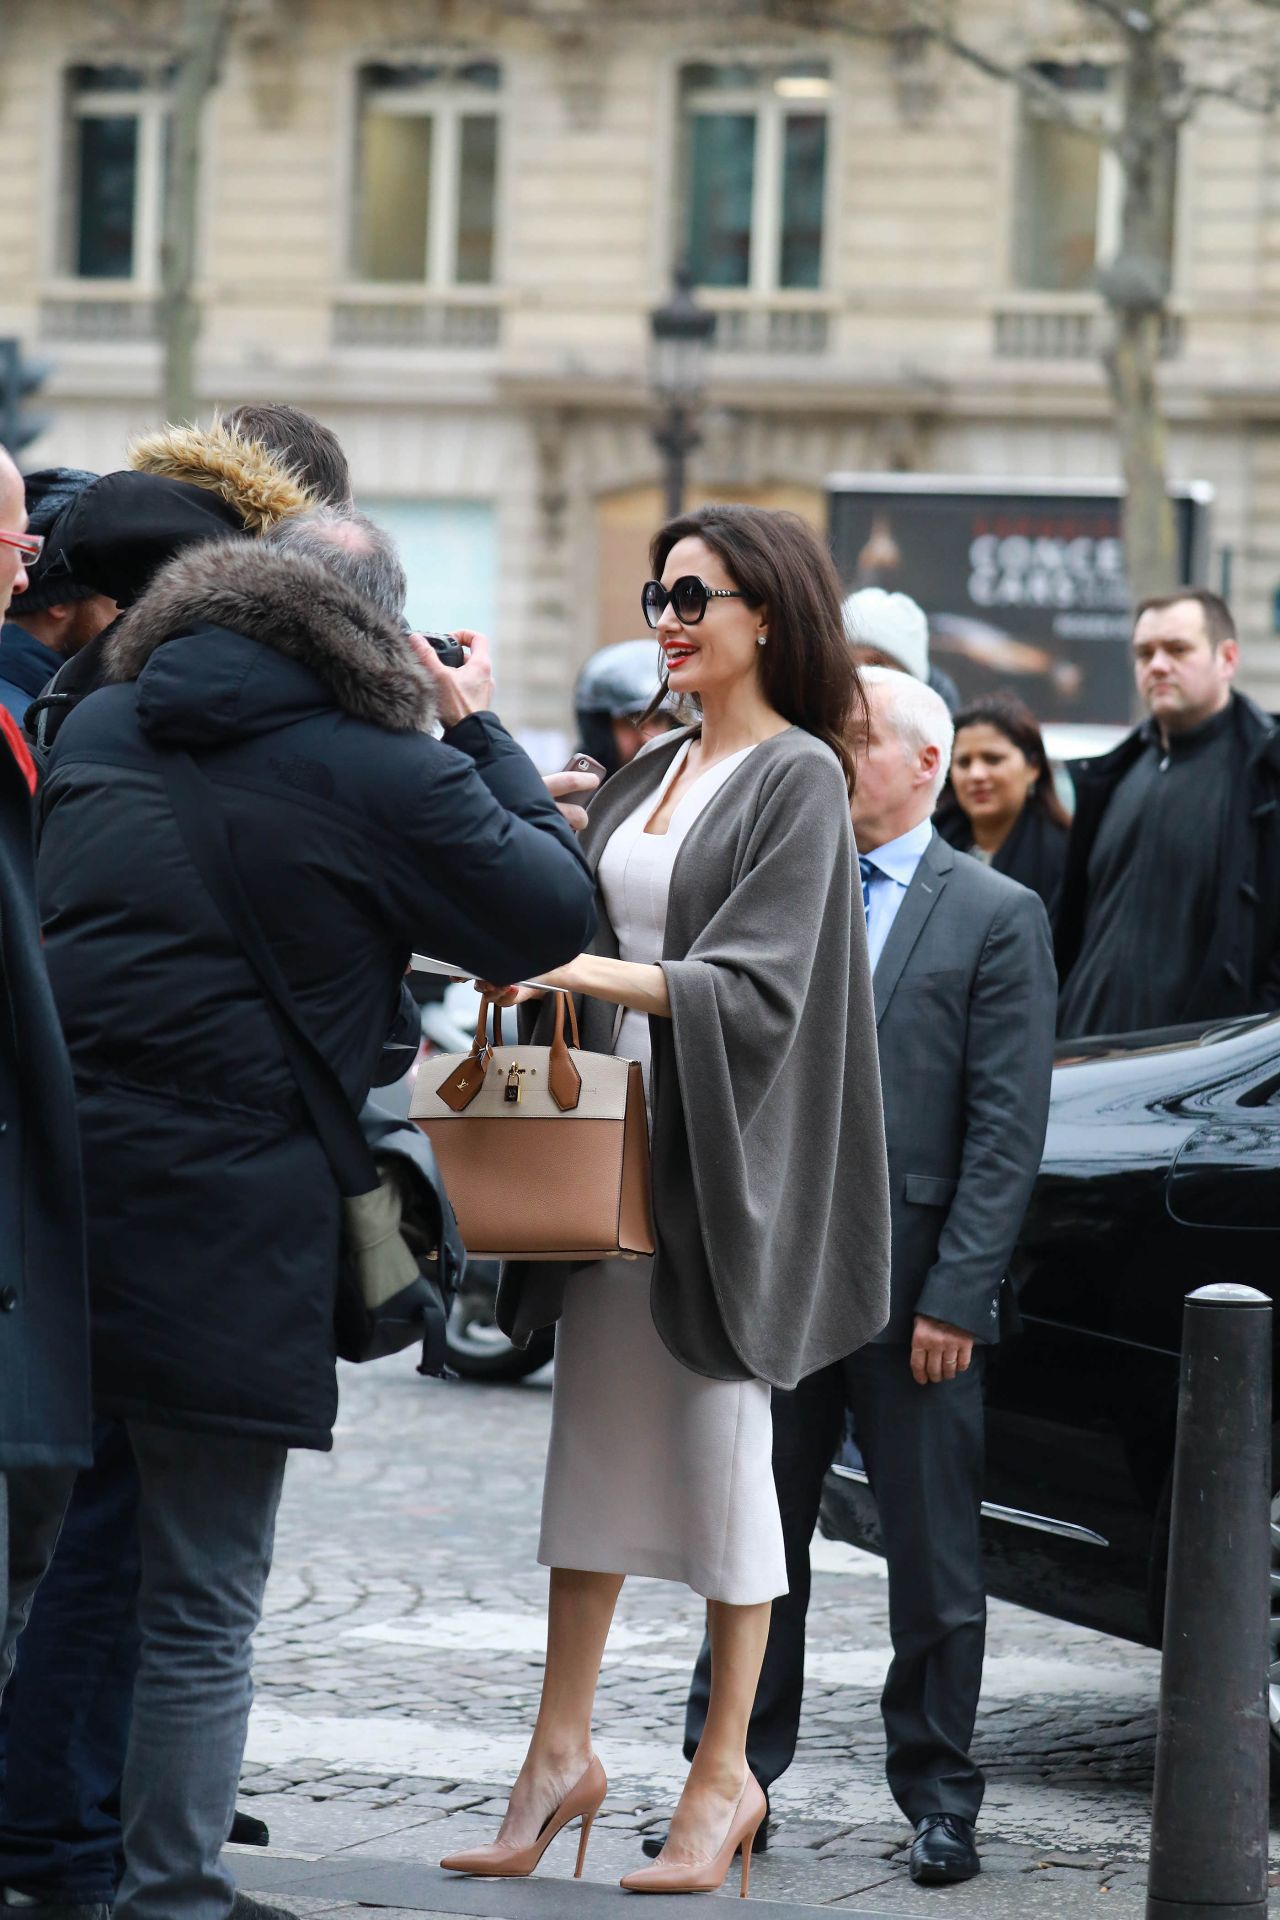 https://celebmafia.com/wp-content/uploads/2018/01/angelina-jolie-goes-to-guerlain-perfumes-shop-on-the-champs-elysees-in-paris-2.jpg